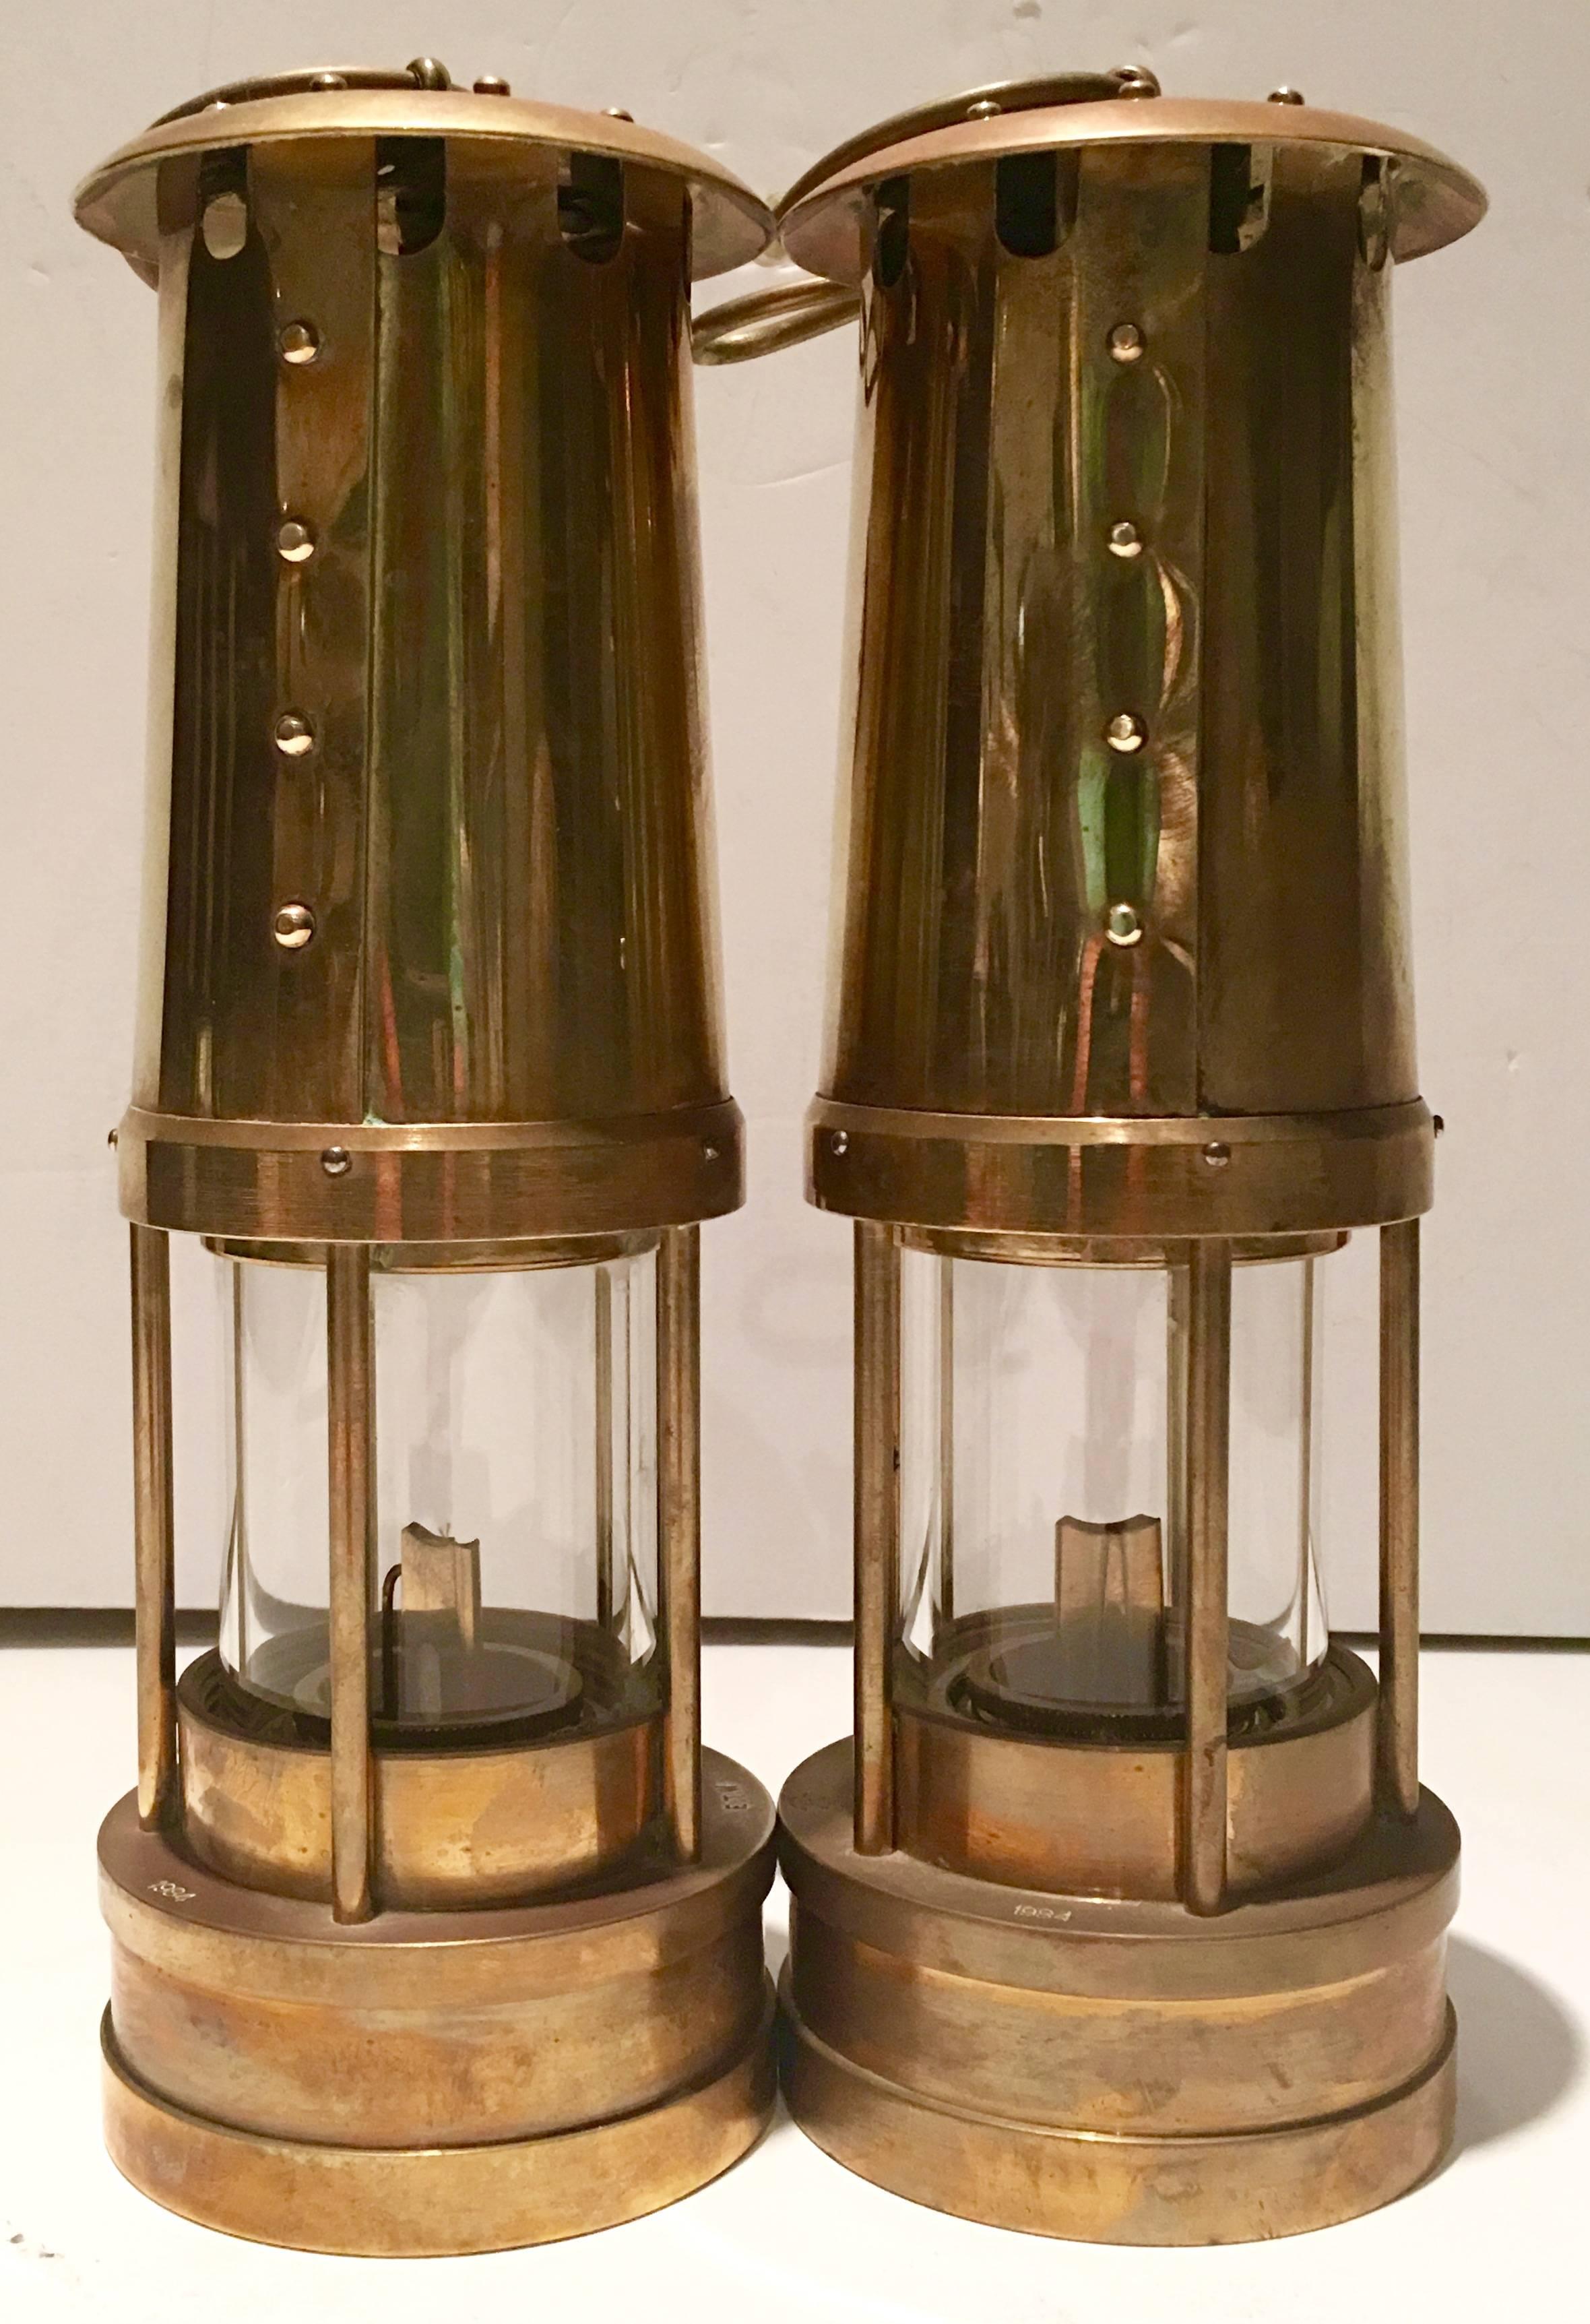 thomas and williams miners lamp numbers